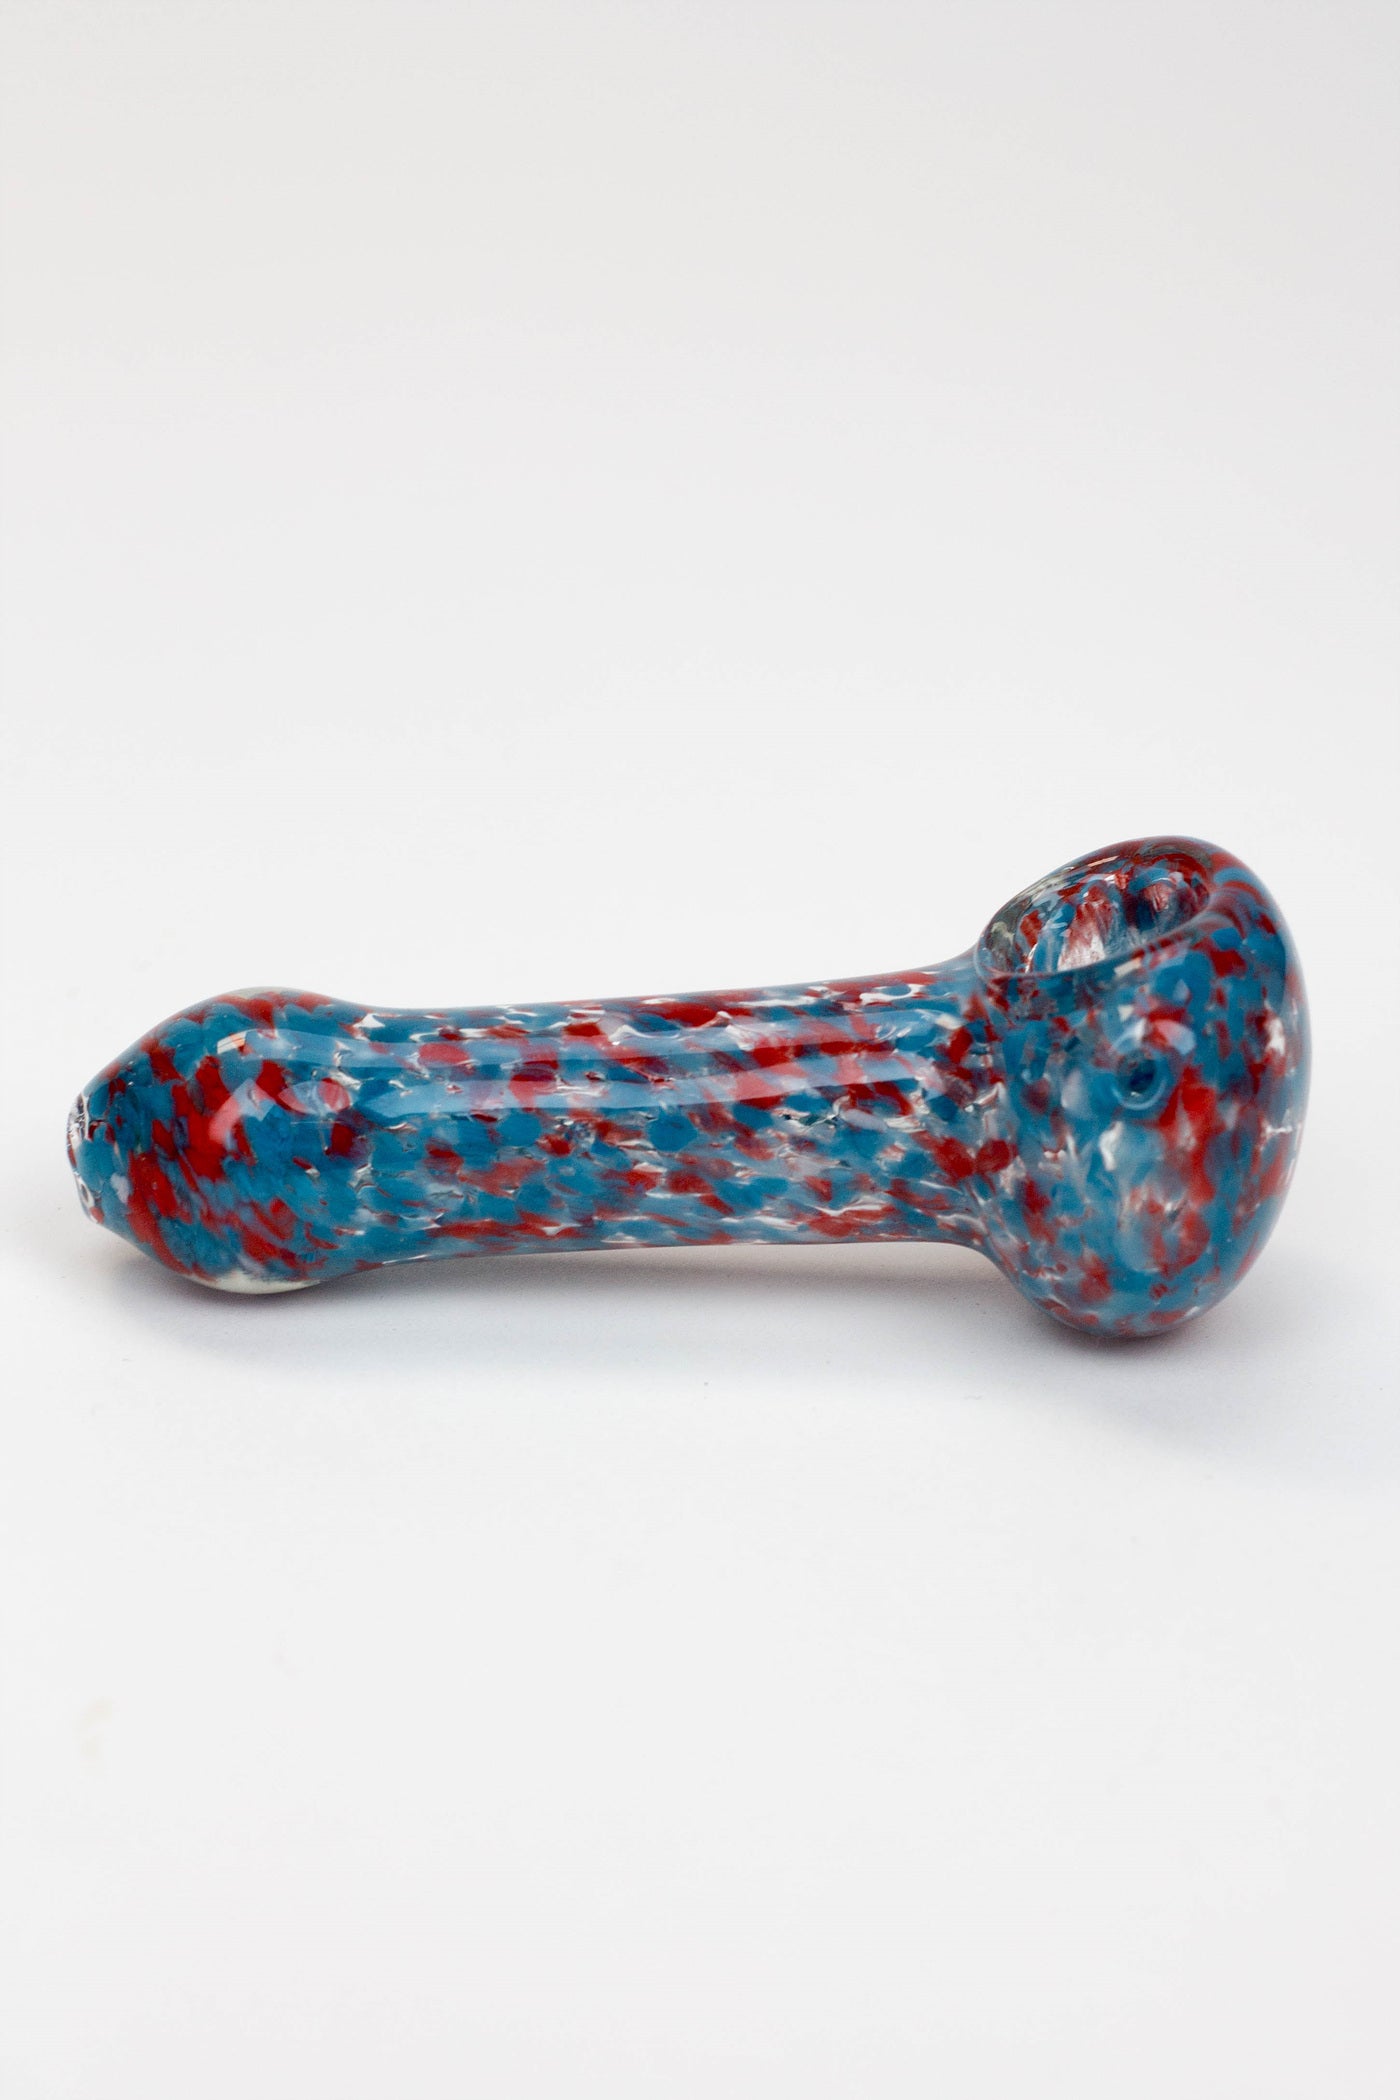 3.5" Soft glass 8552 hand pipe_4